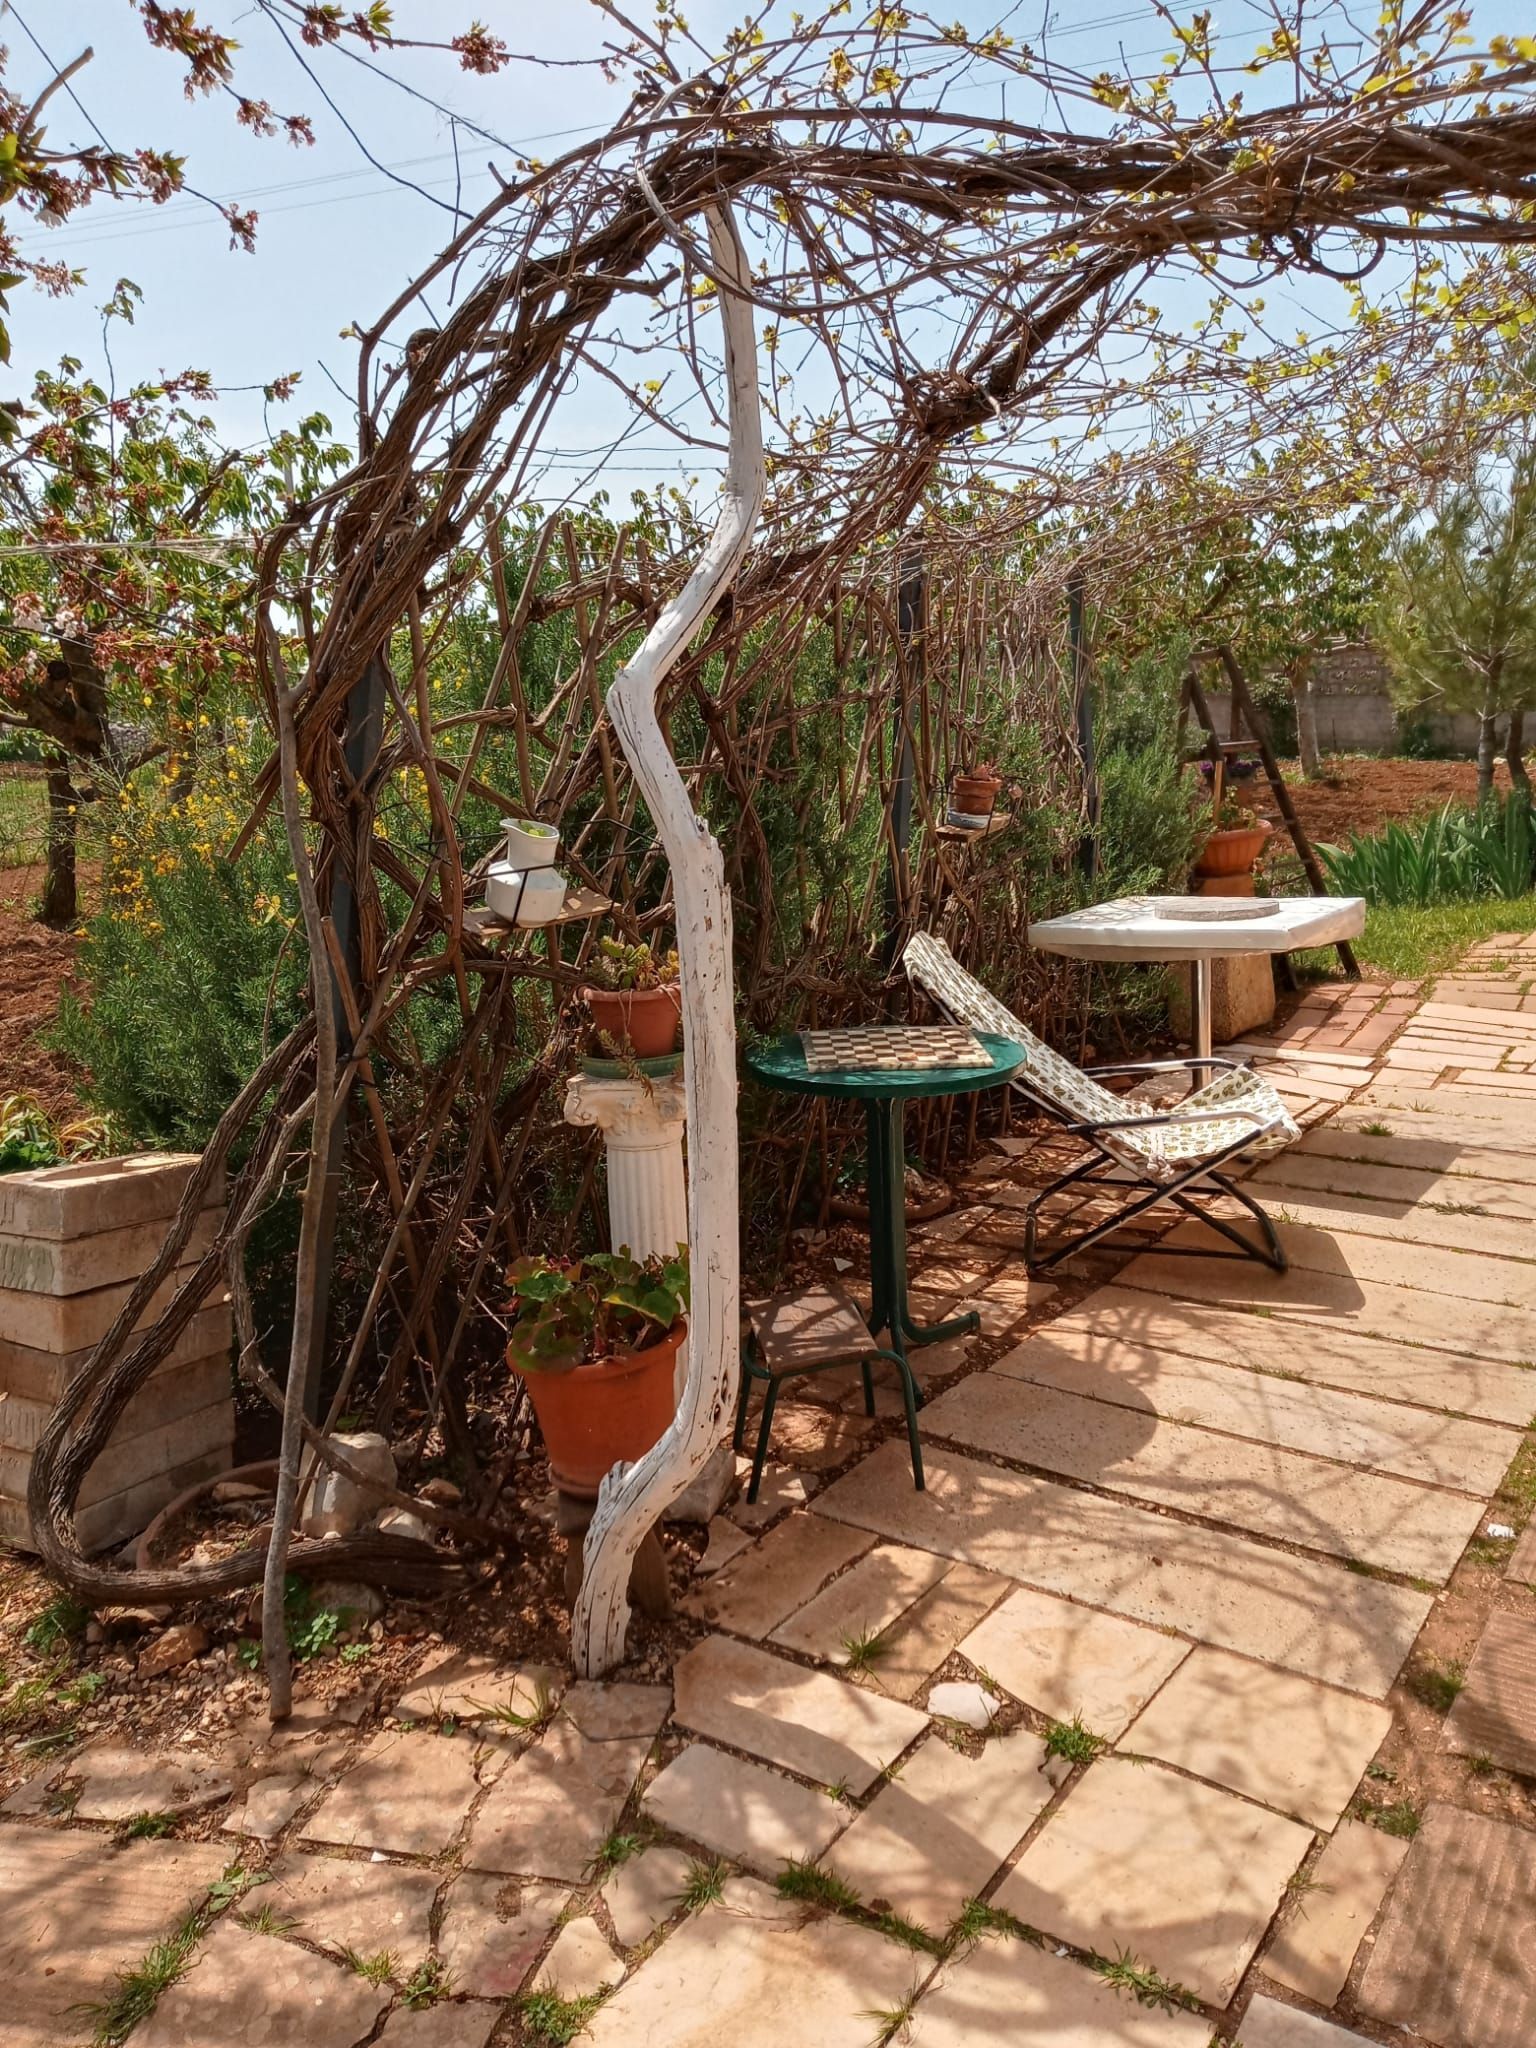 Camping "Immersed in the Puglia countryside" - among olive and cherry trees in Gioia Del Colle